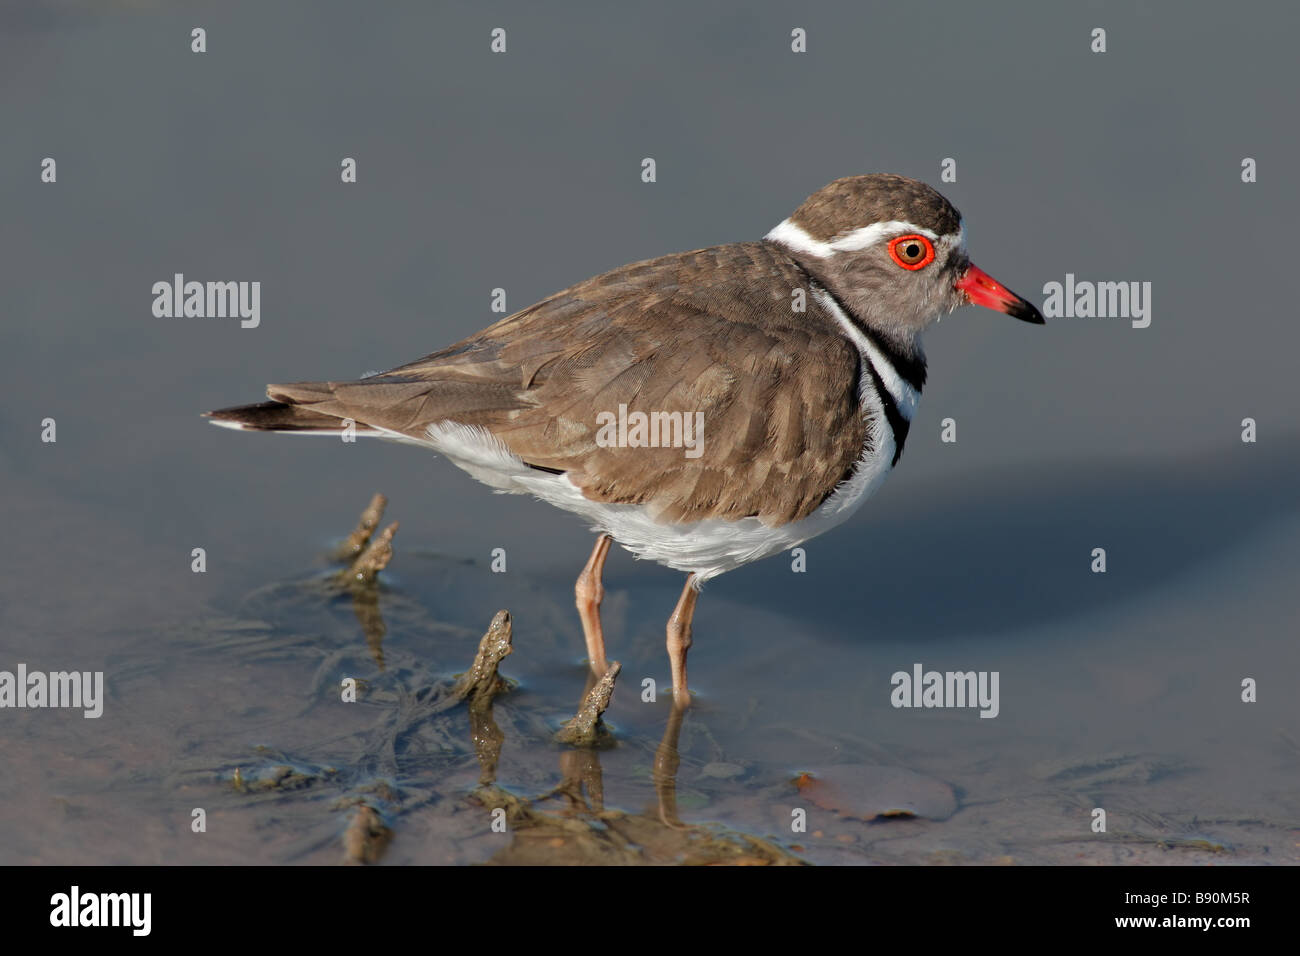 Threebanded plover (Charadrius tricollaris) standing in water, Kruger National Park, South Africa Stock Photo